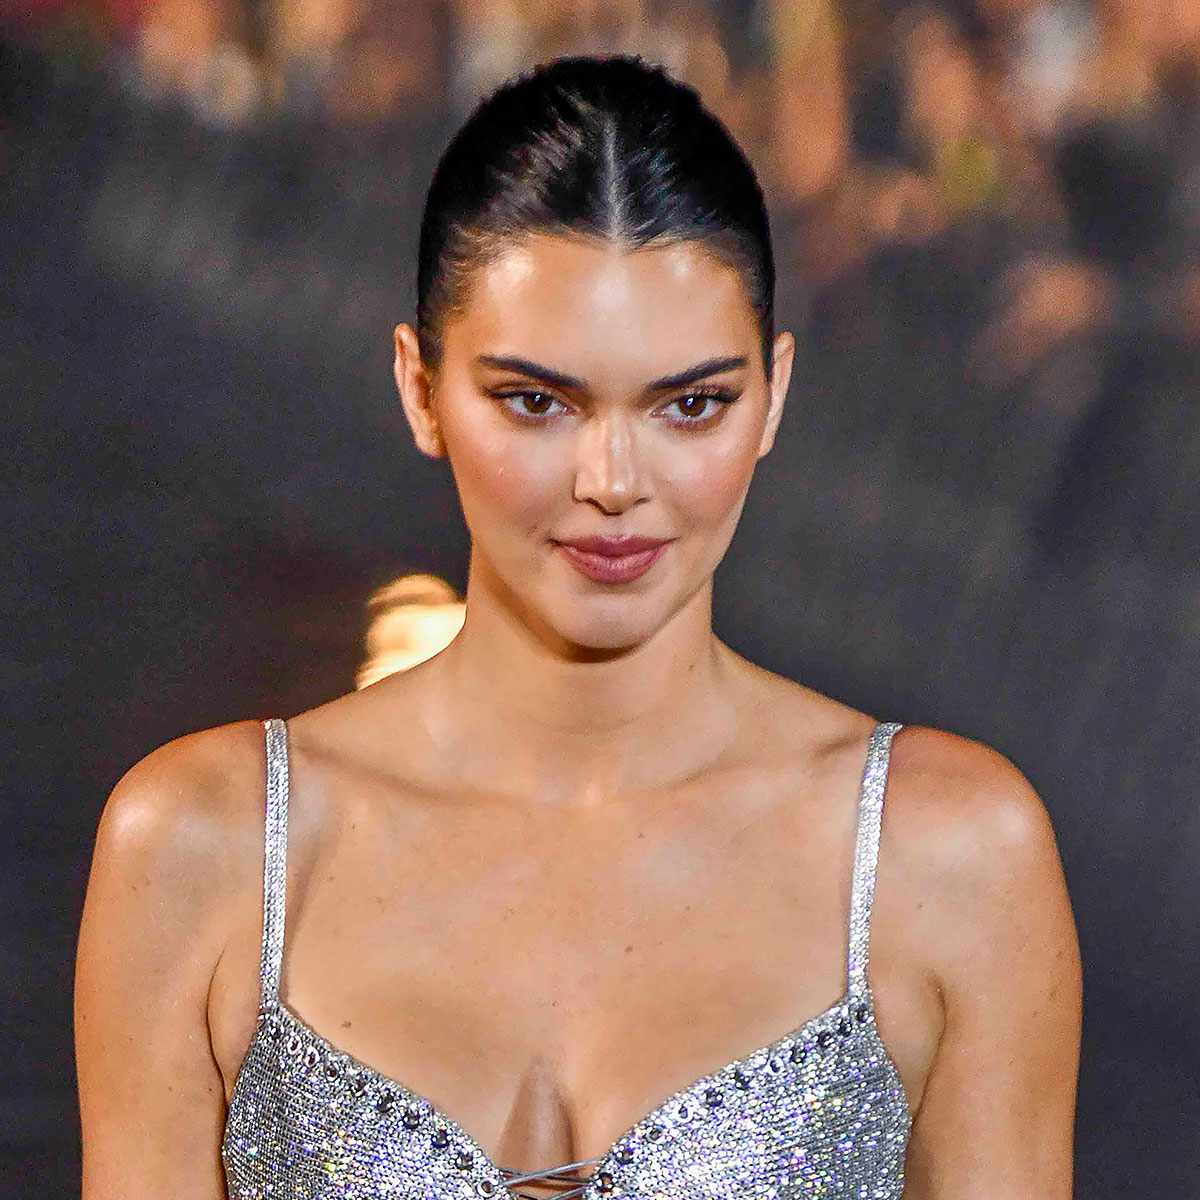 Kendall Jenner wore a dress made of red fingernails on